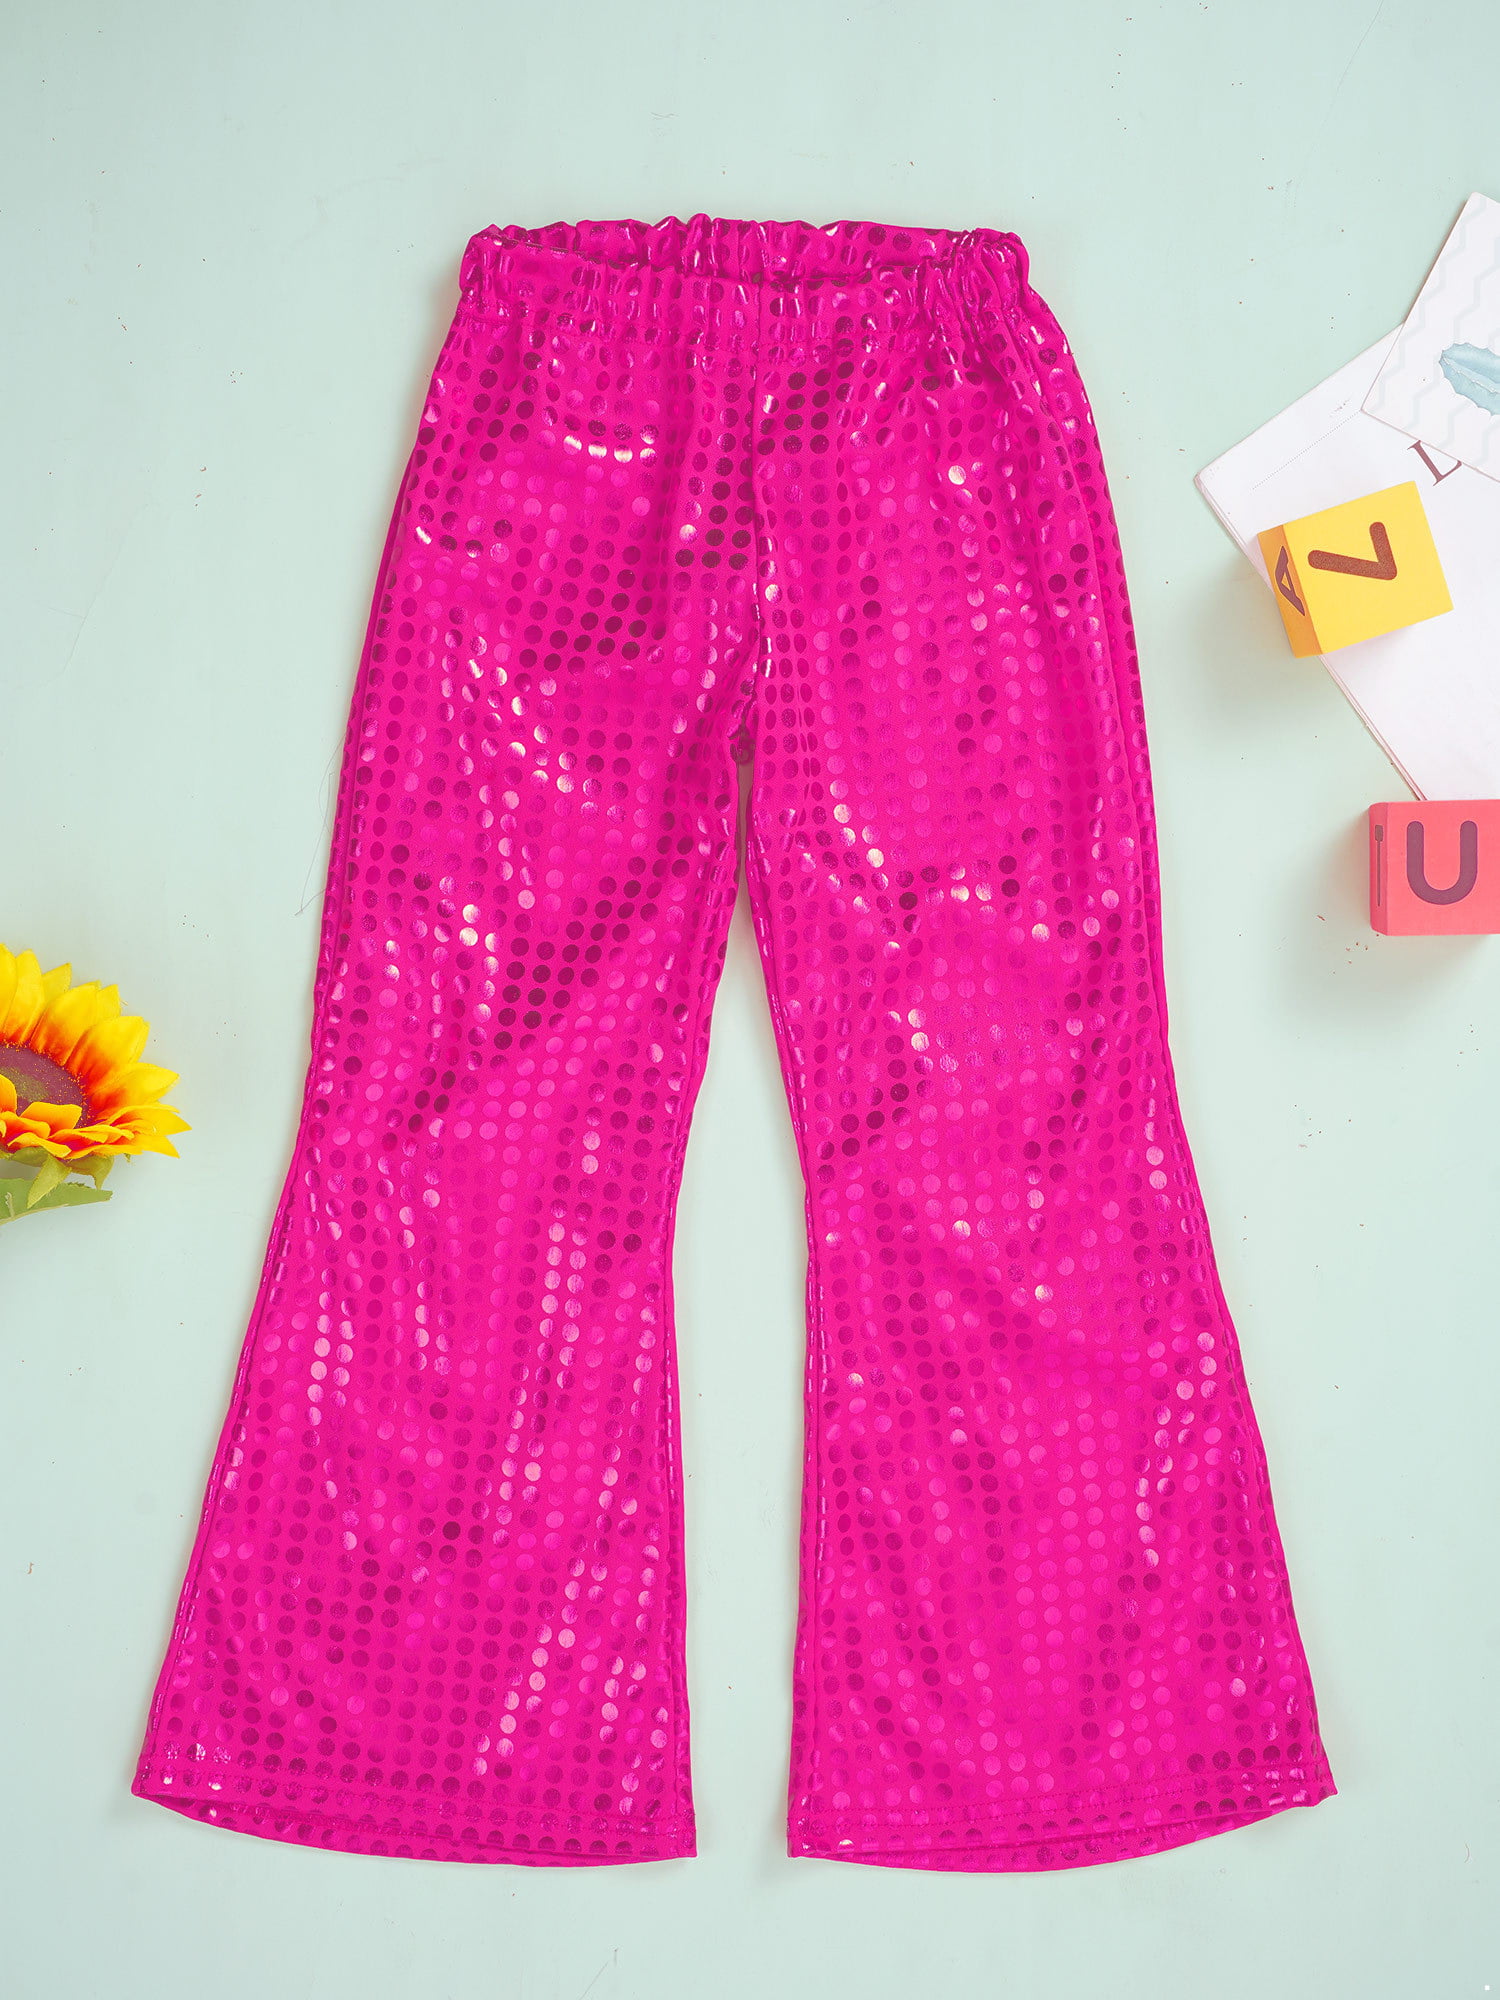 inhzoy Kids Girls Elastic Waist Sparkly Sequin Flared Pants Dance  Performance Shiny Bell-Bottom Trousers Hot Pink 7-8 